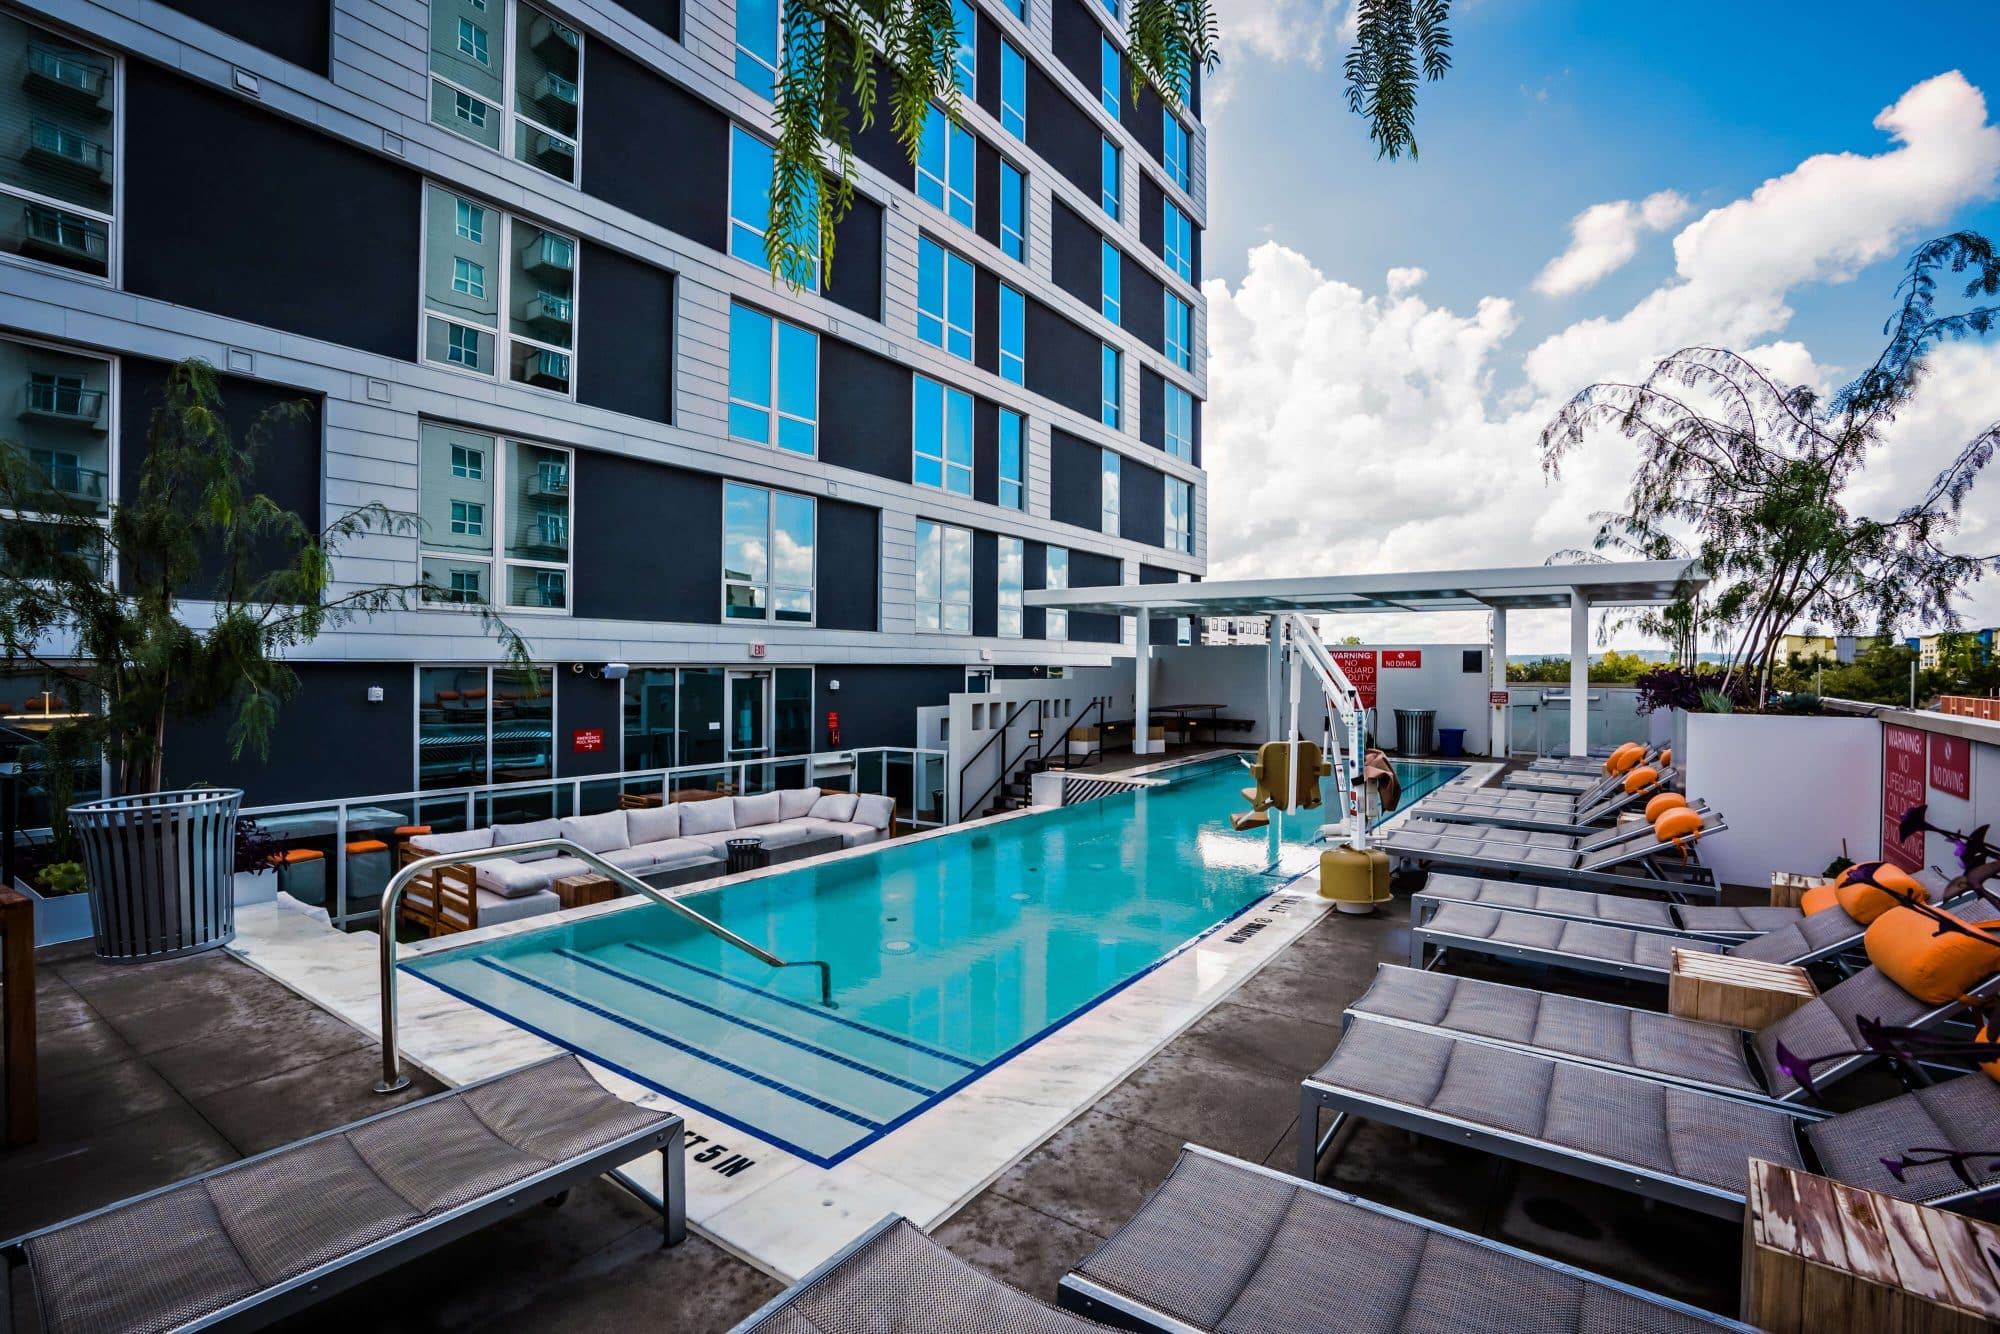 signature 1909 off campus apartments near ut austin west campus rooftop pool and lounge